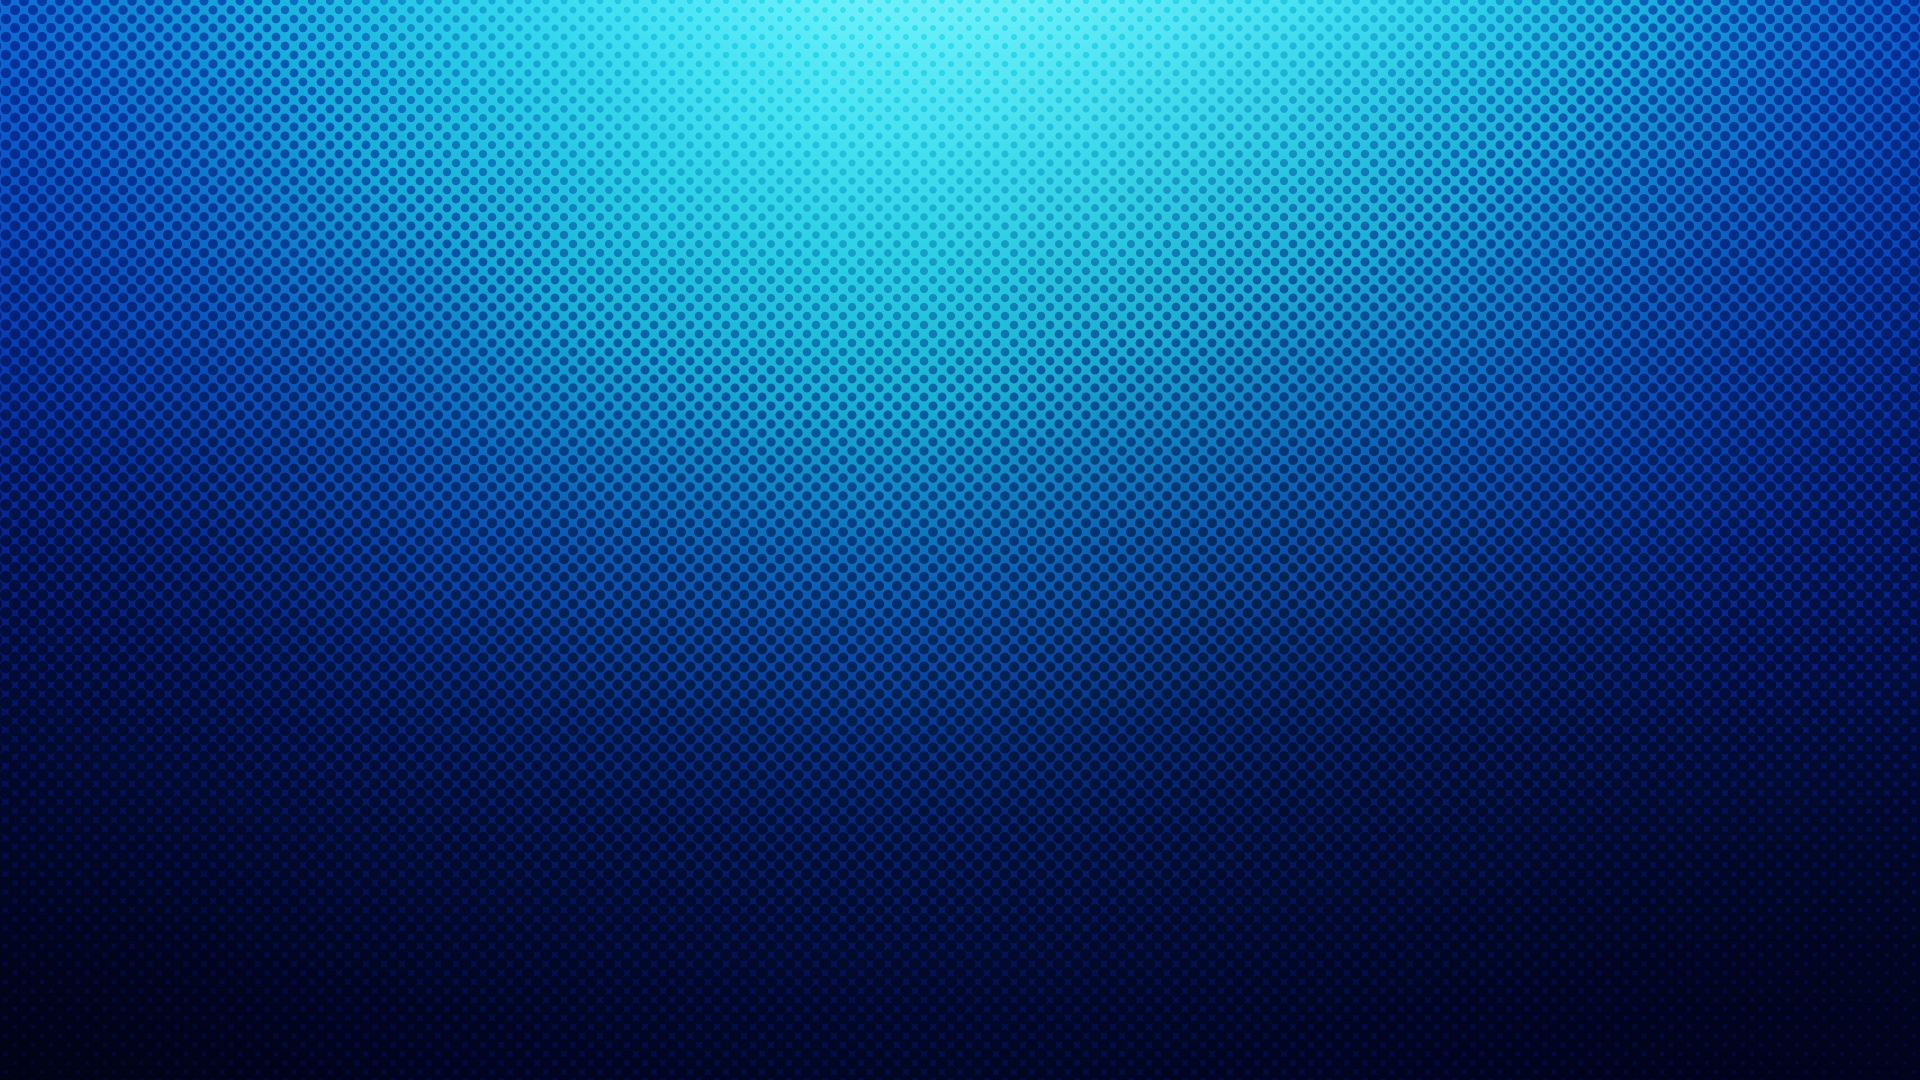 Wallpaper Texture Blue Background Shadow Full HD 1080p